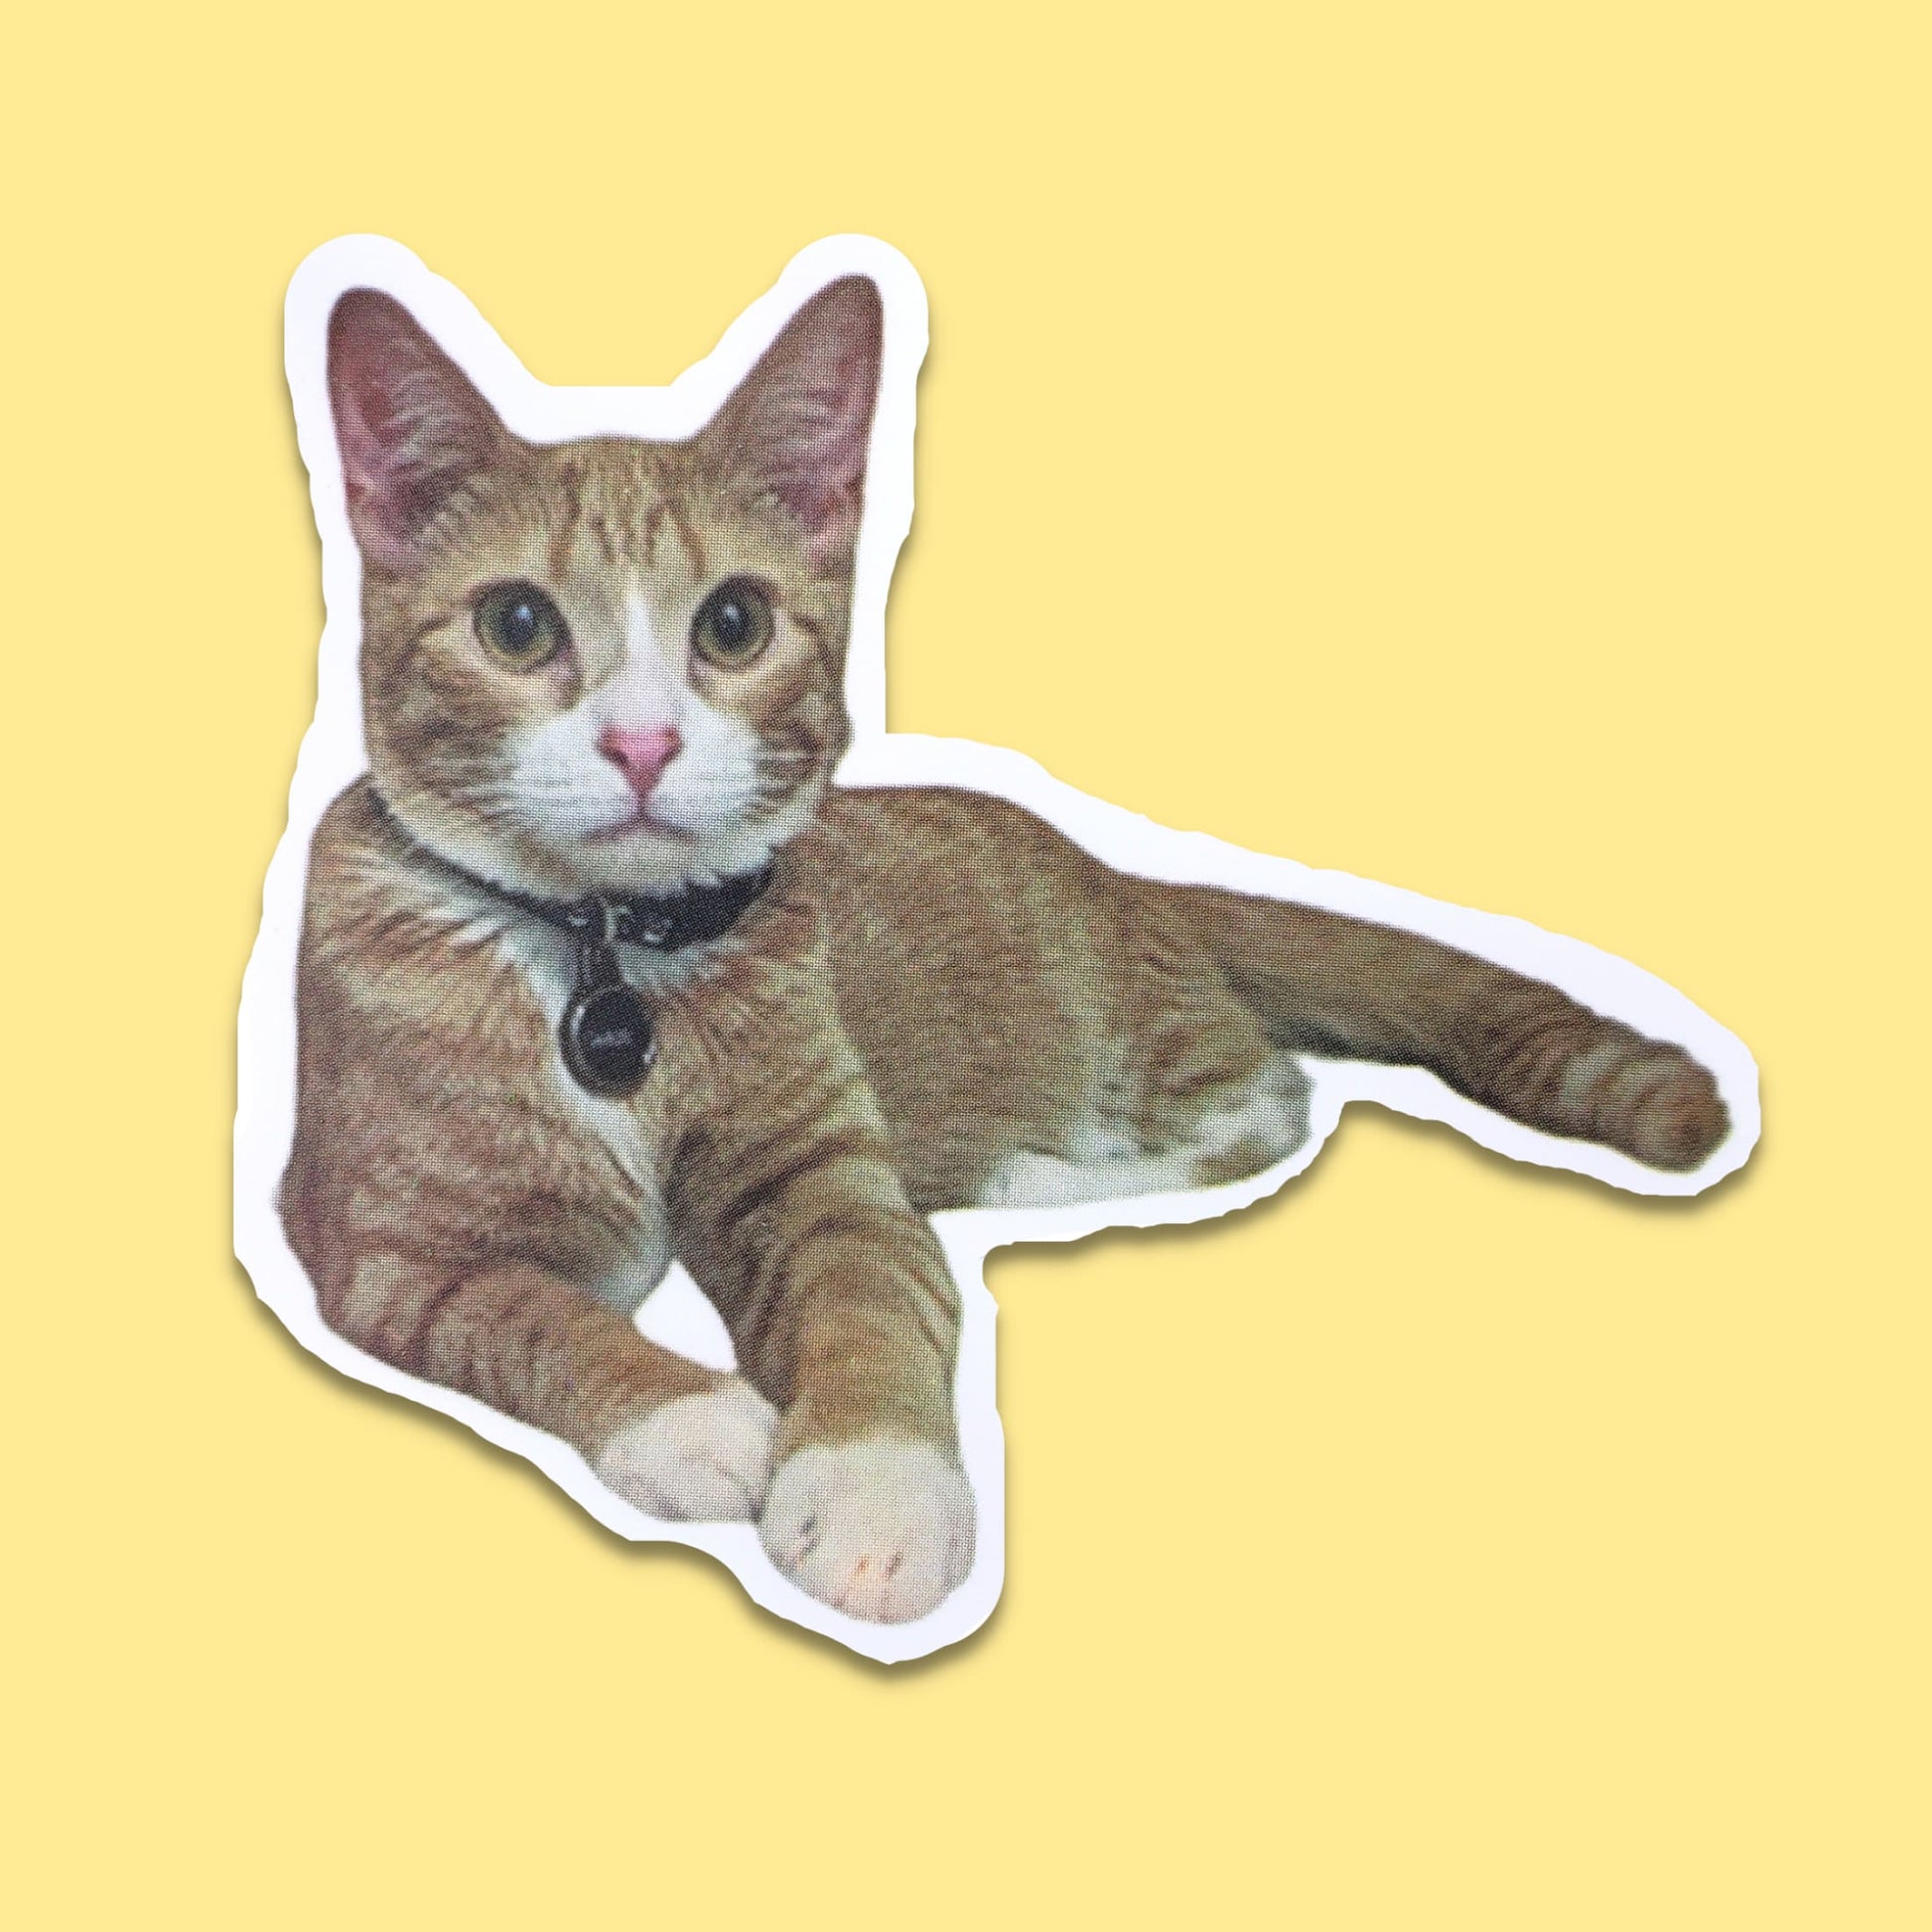 Orange Tabby with Collar Waterproof Sticker from Confetti Kitty, Only 1.00